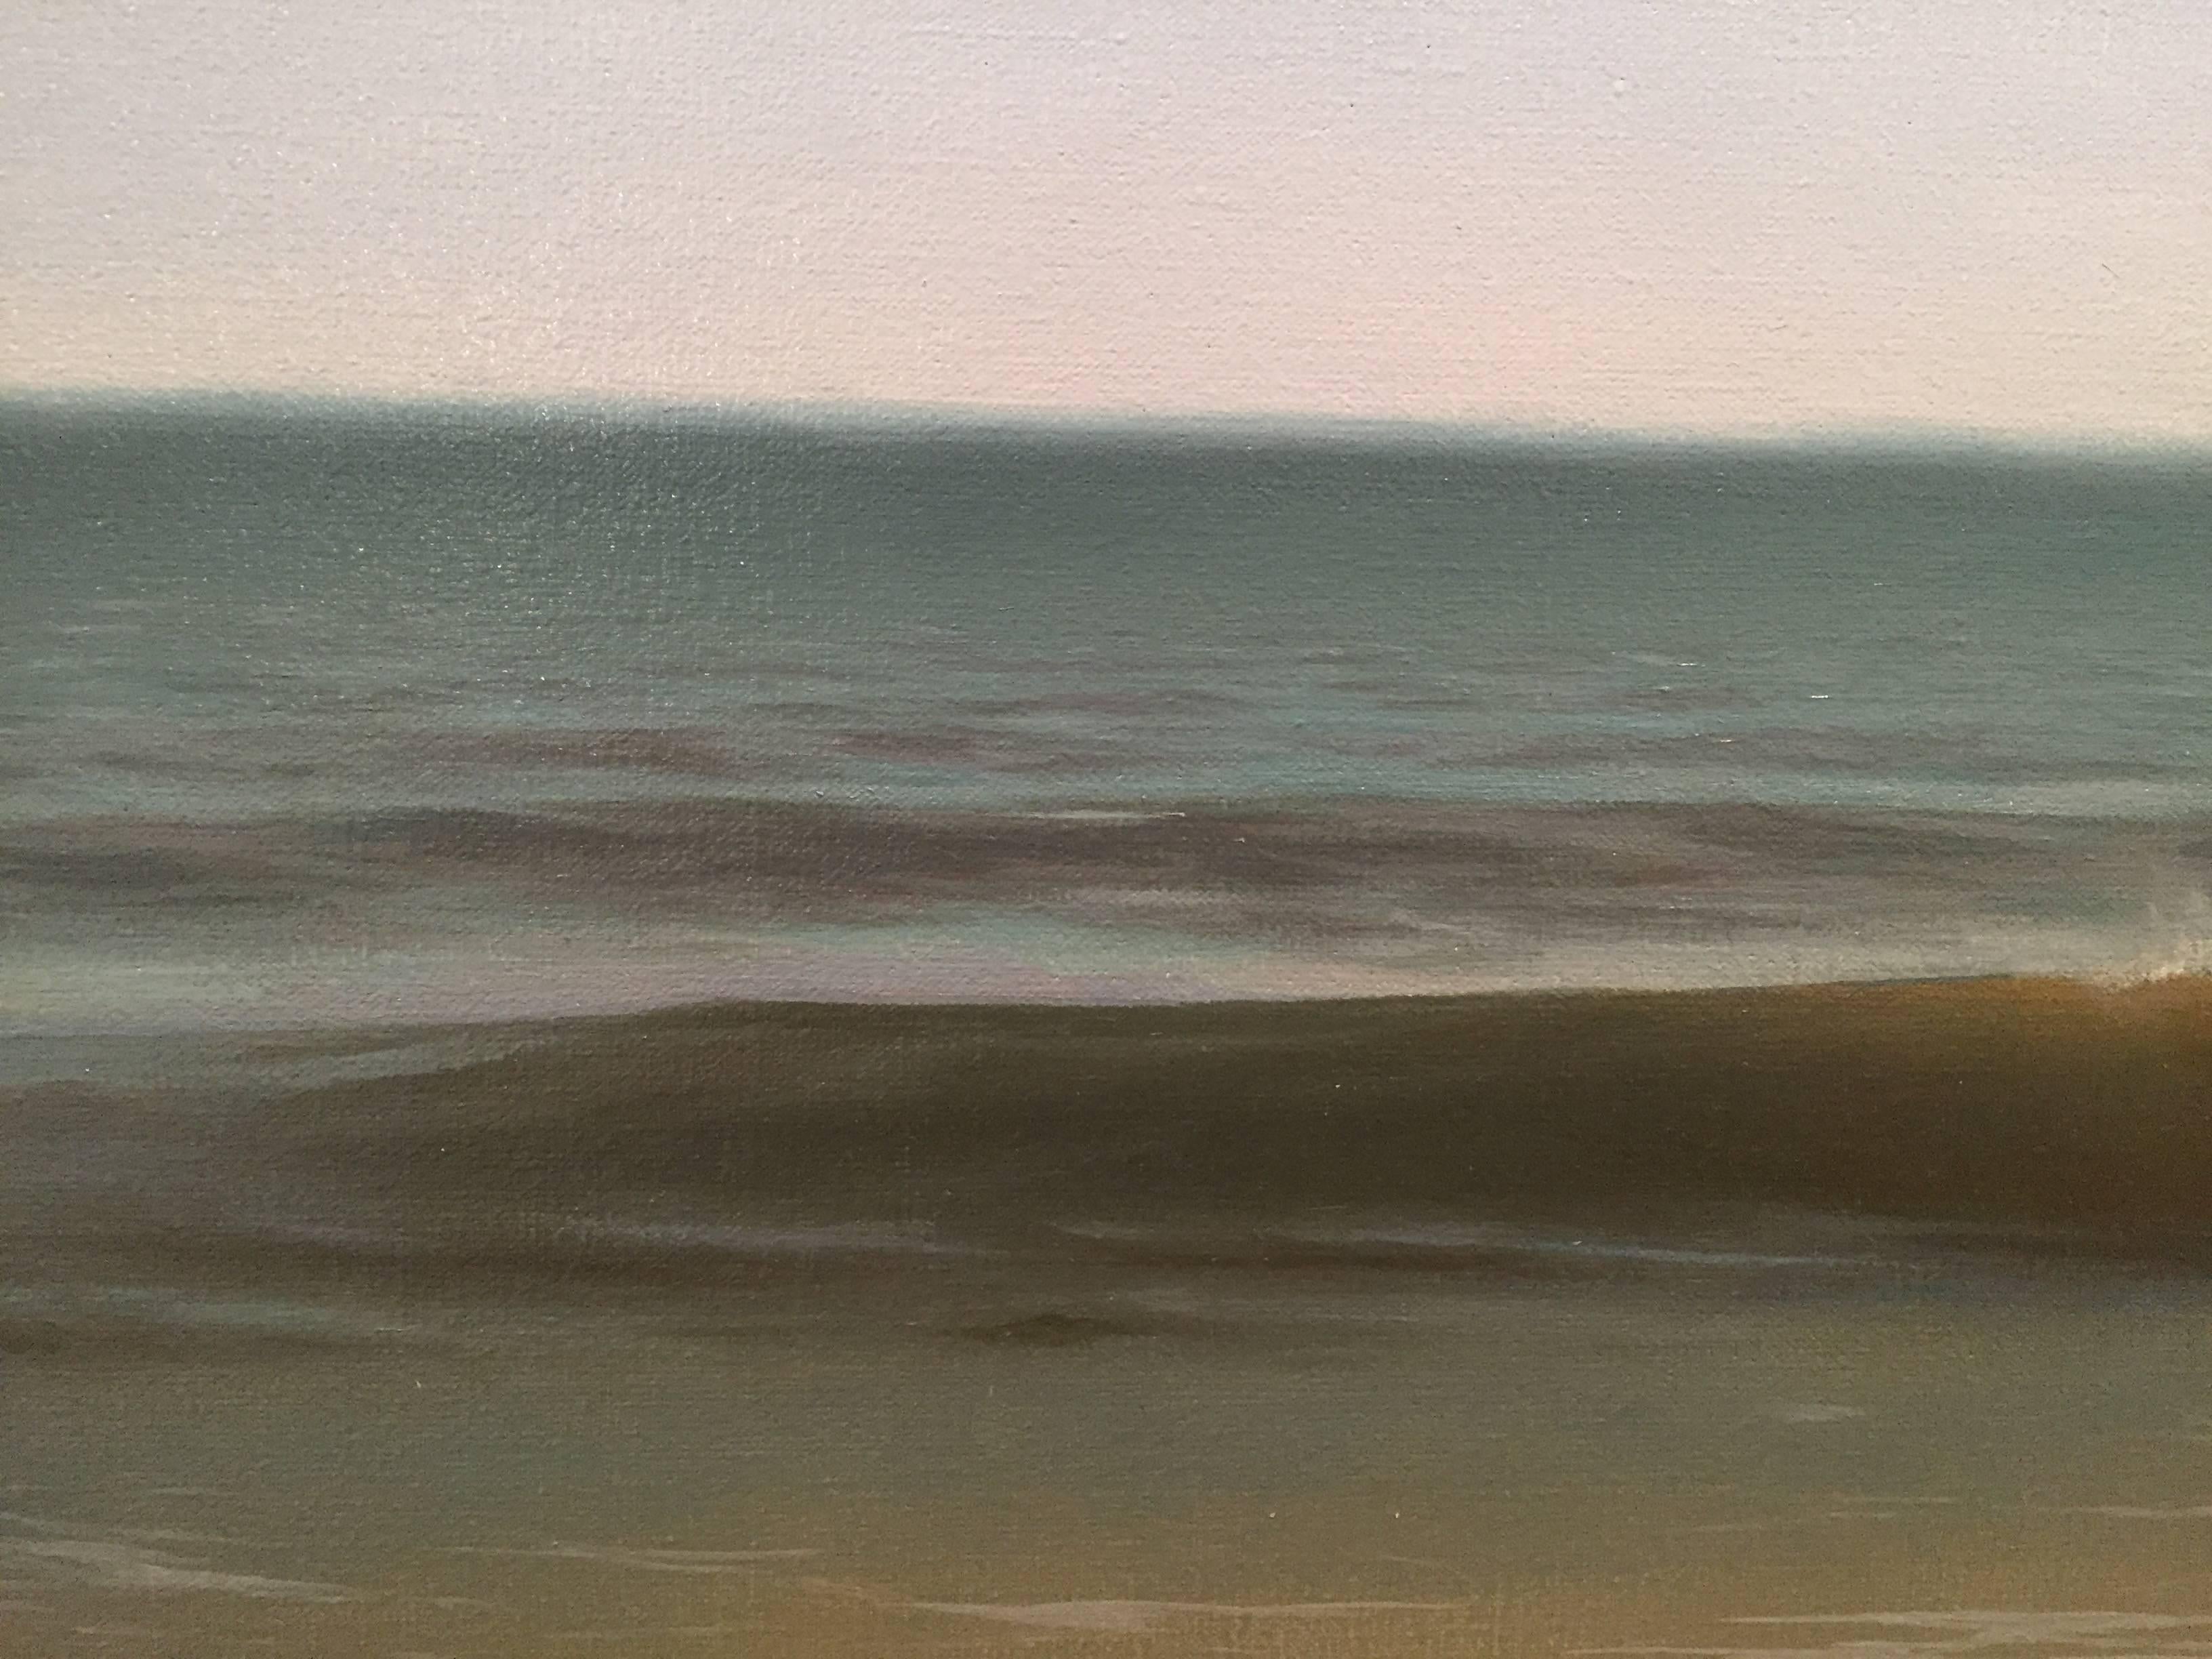 Painted from life, after many studies on site at the beach, Wave, Reflections is a realistically painted seascape. Rich green hues connote the Atlantic Ocean of the Northeast. In the foreground, darks fade into lights as water becomes more shallow